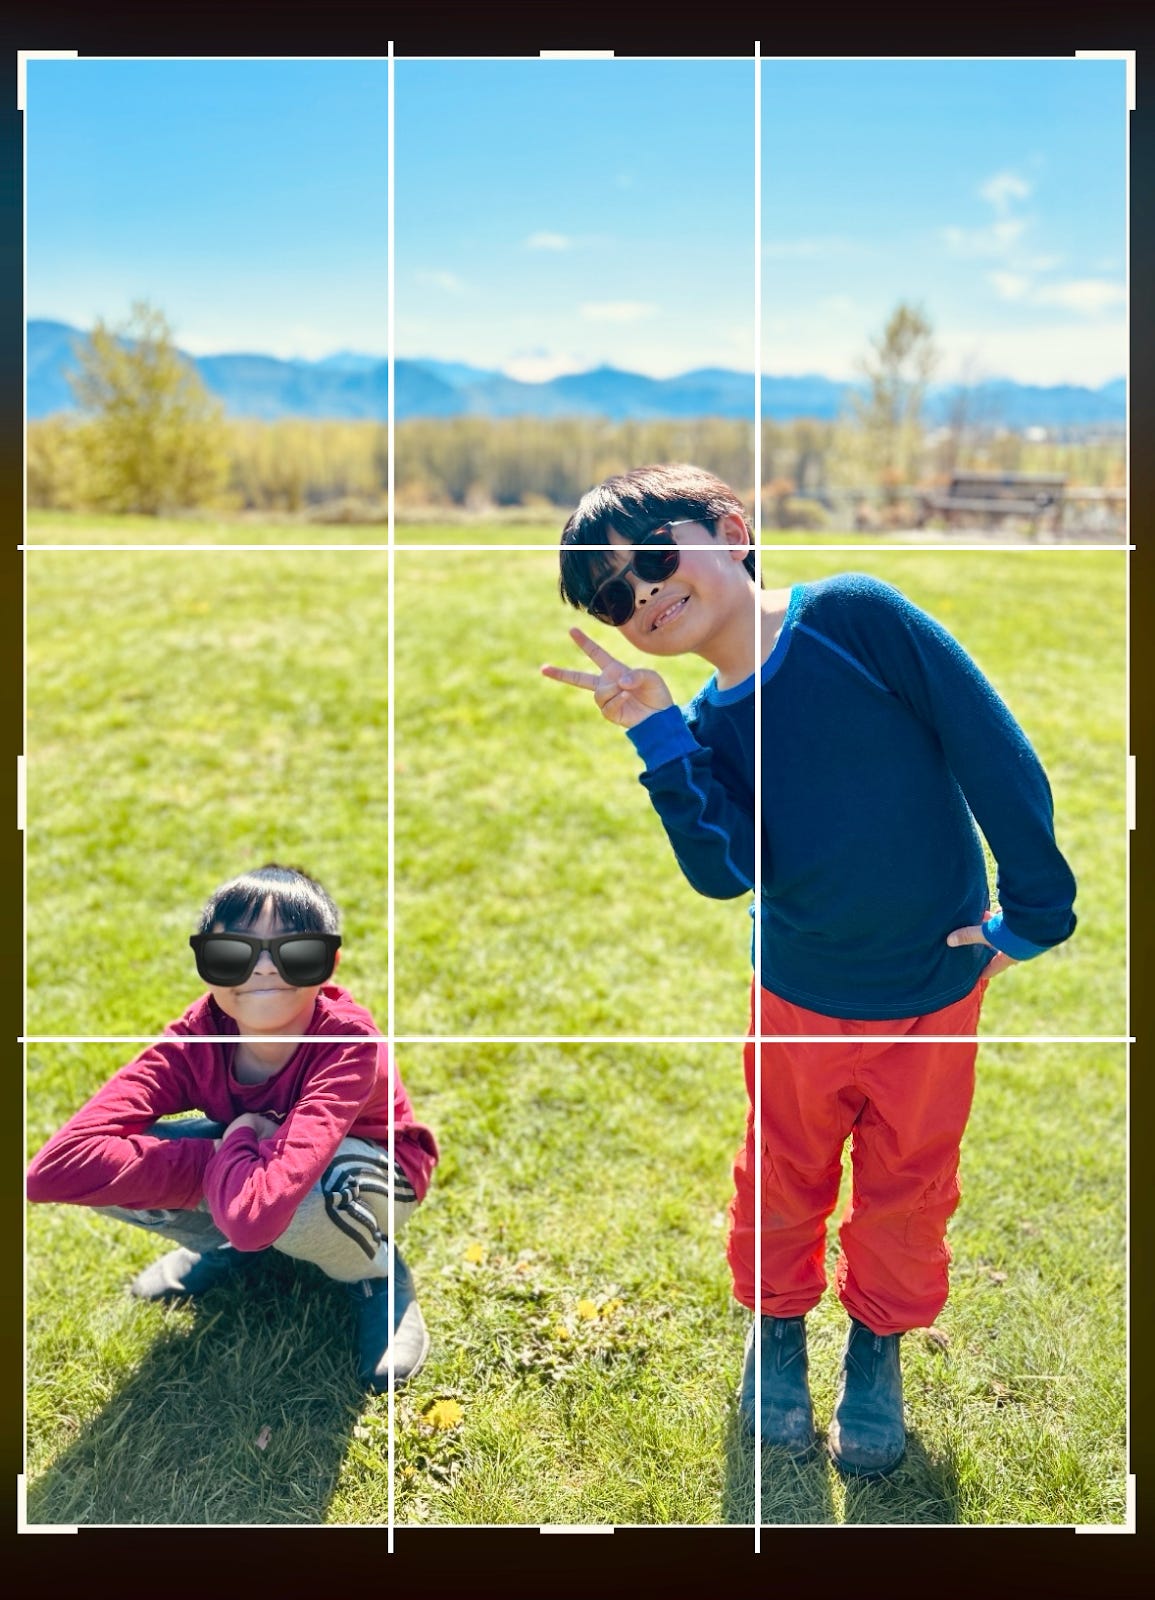 Two kids posing outside on a sunny day, framed according to the rule of thirds.